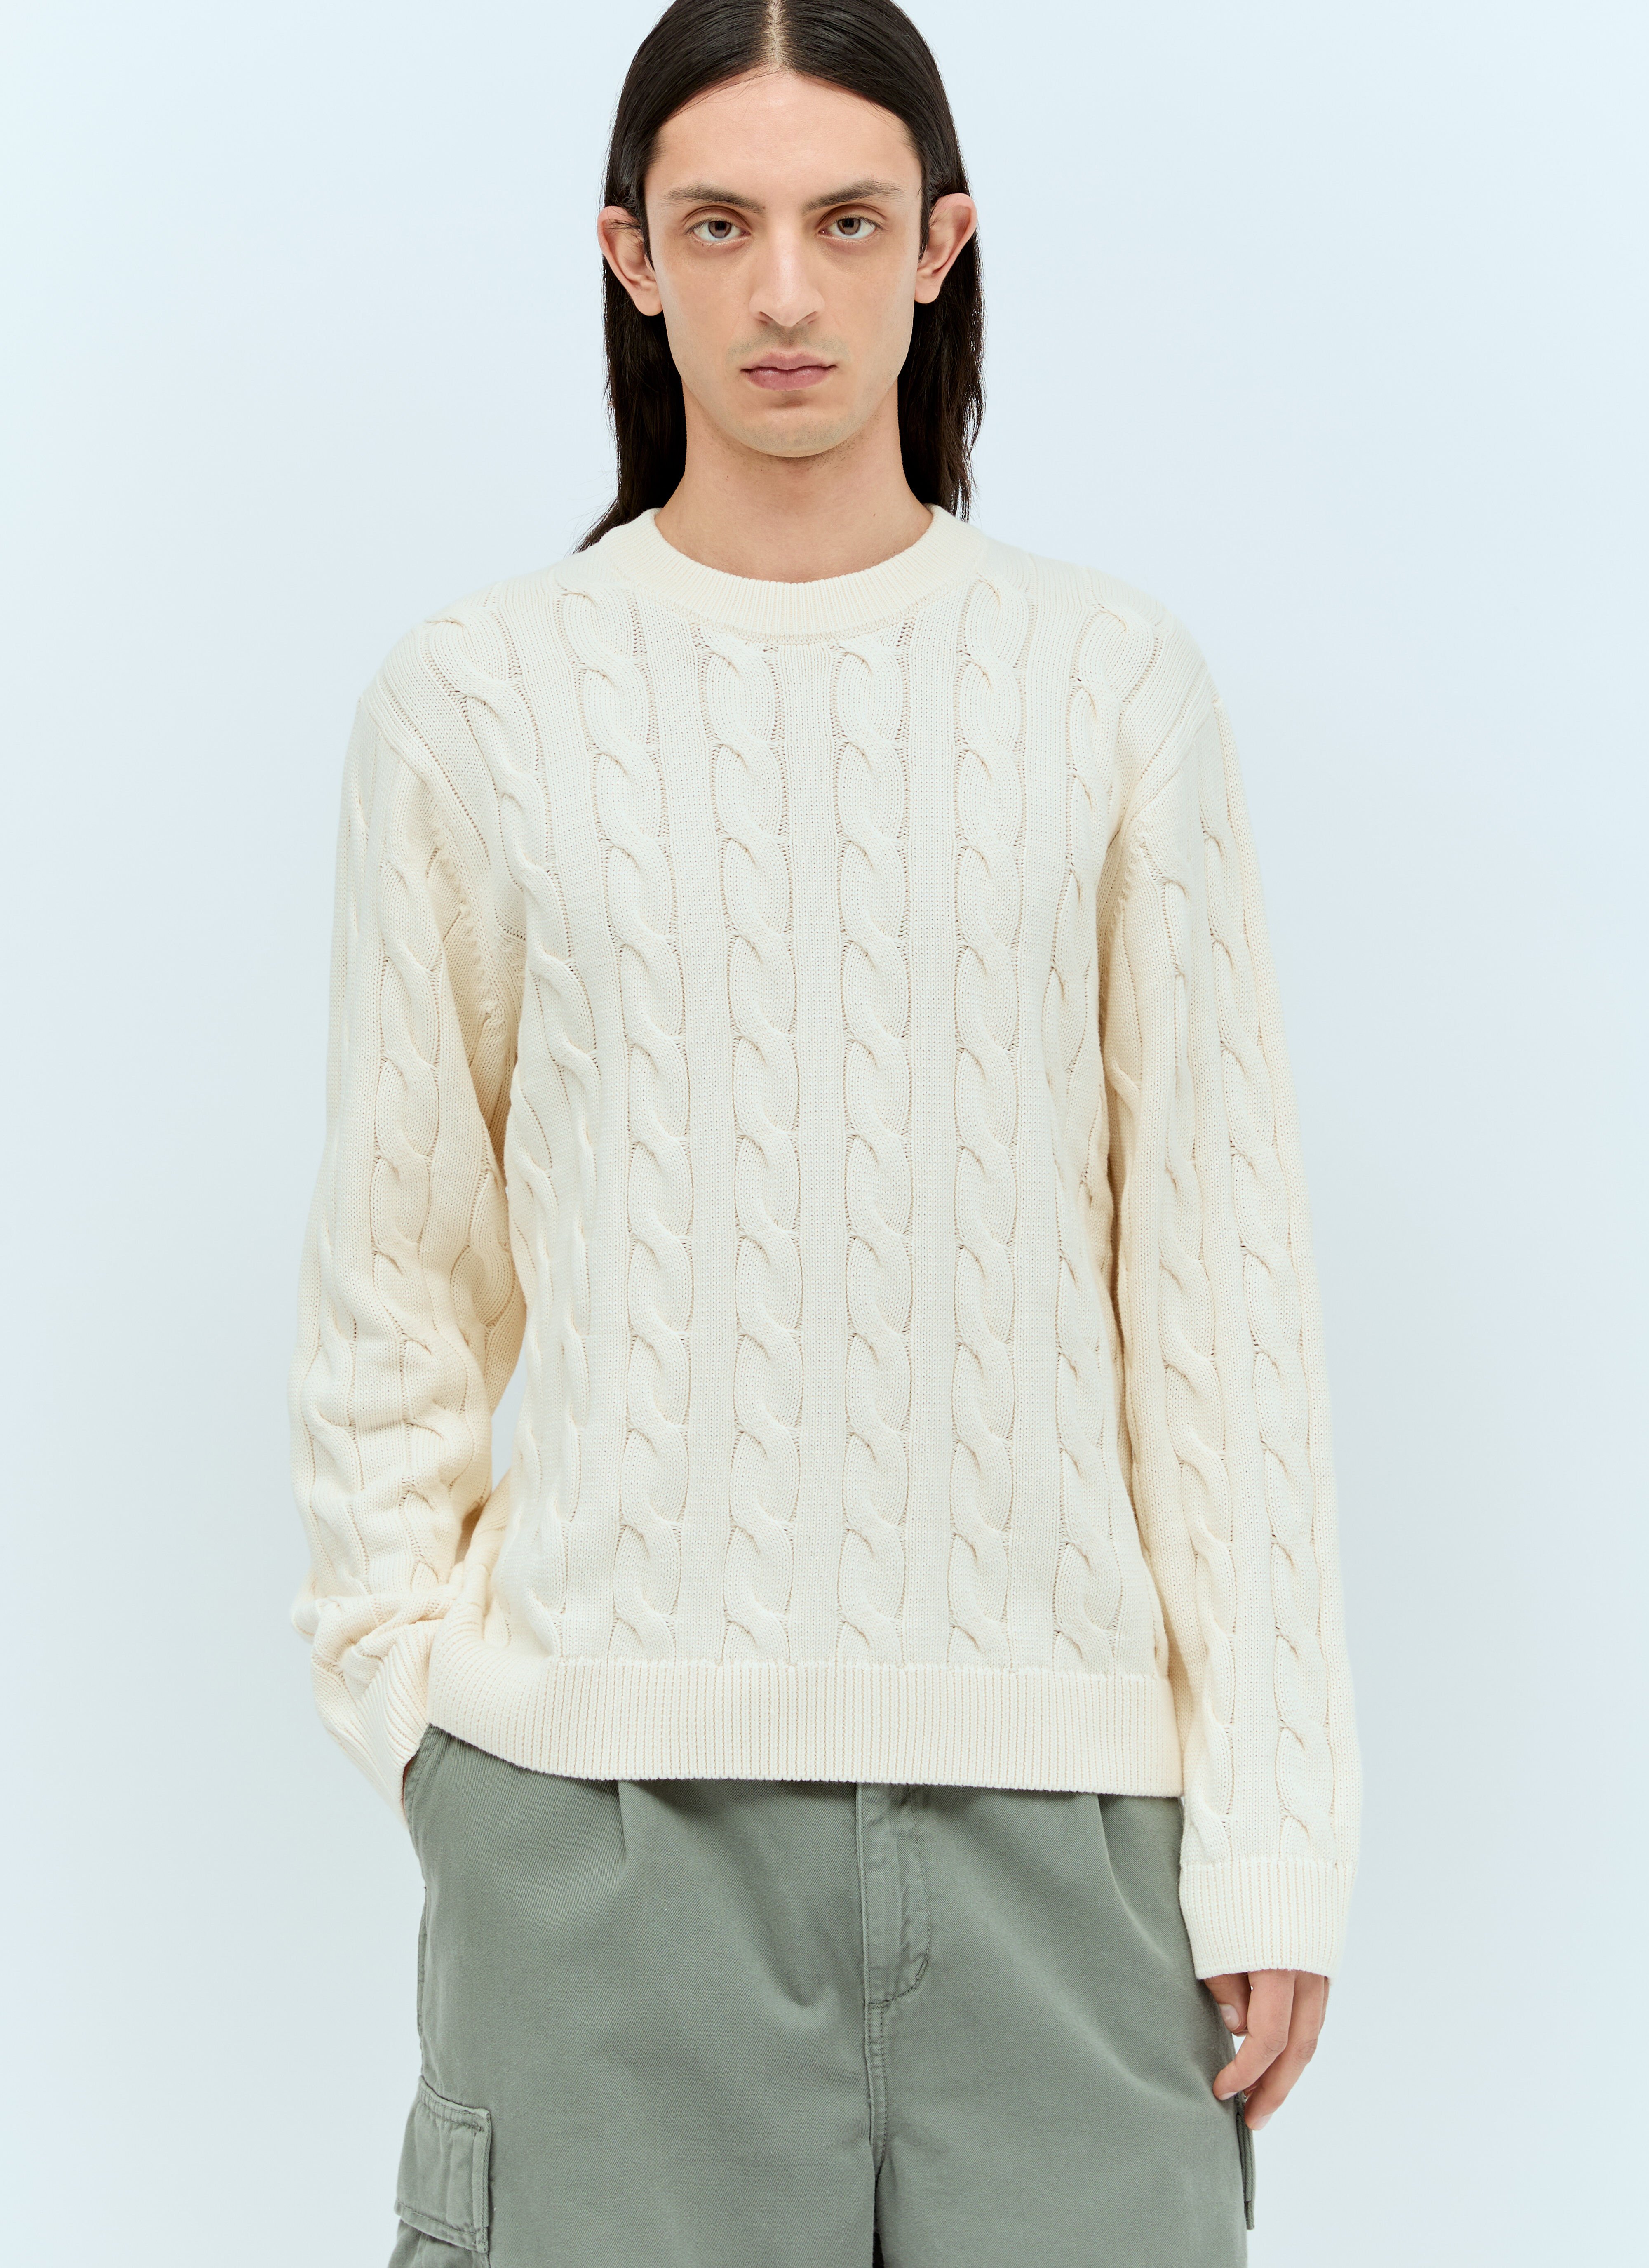 Stüssy Cambell Sweater Beige sts0157004